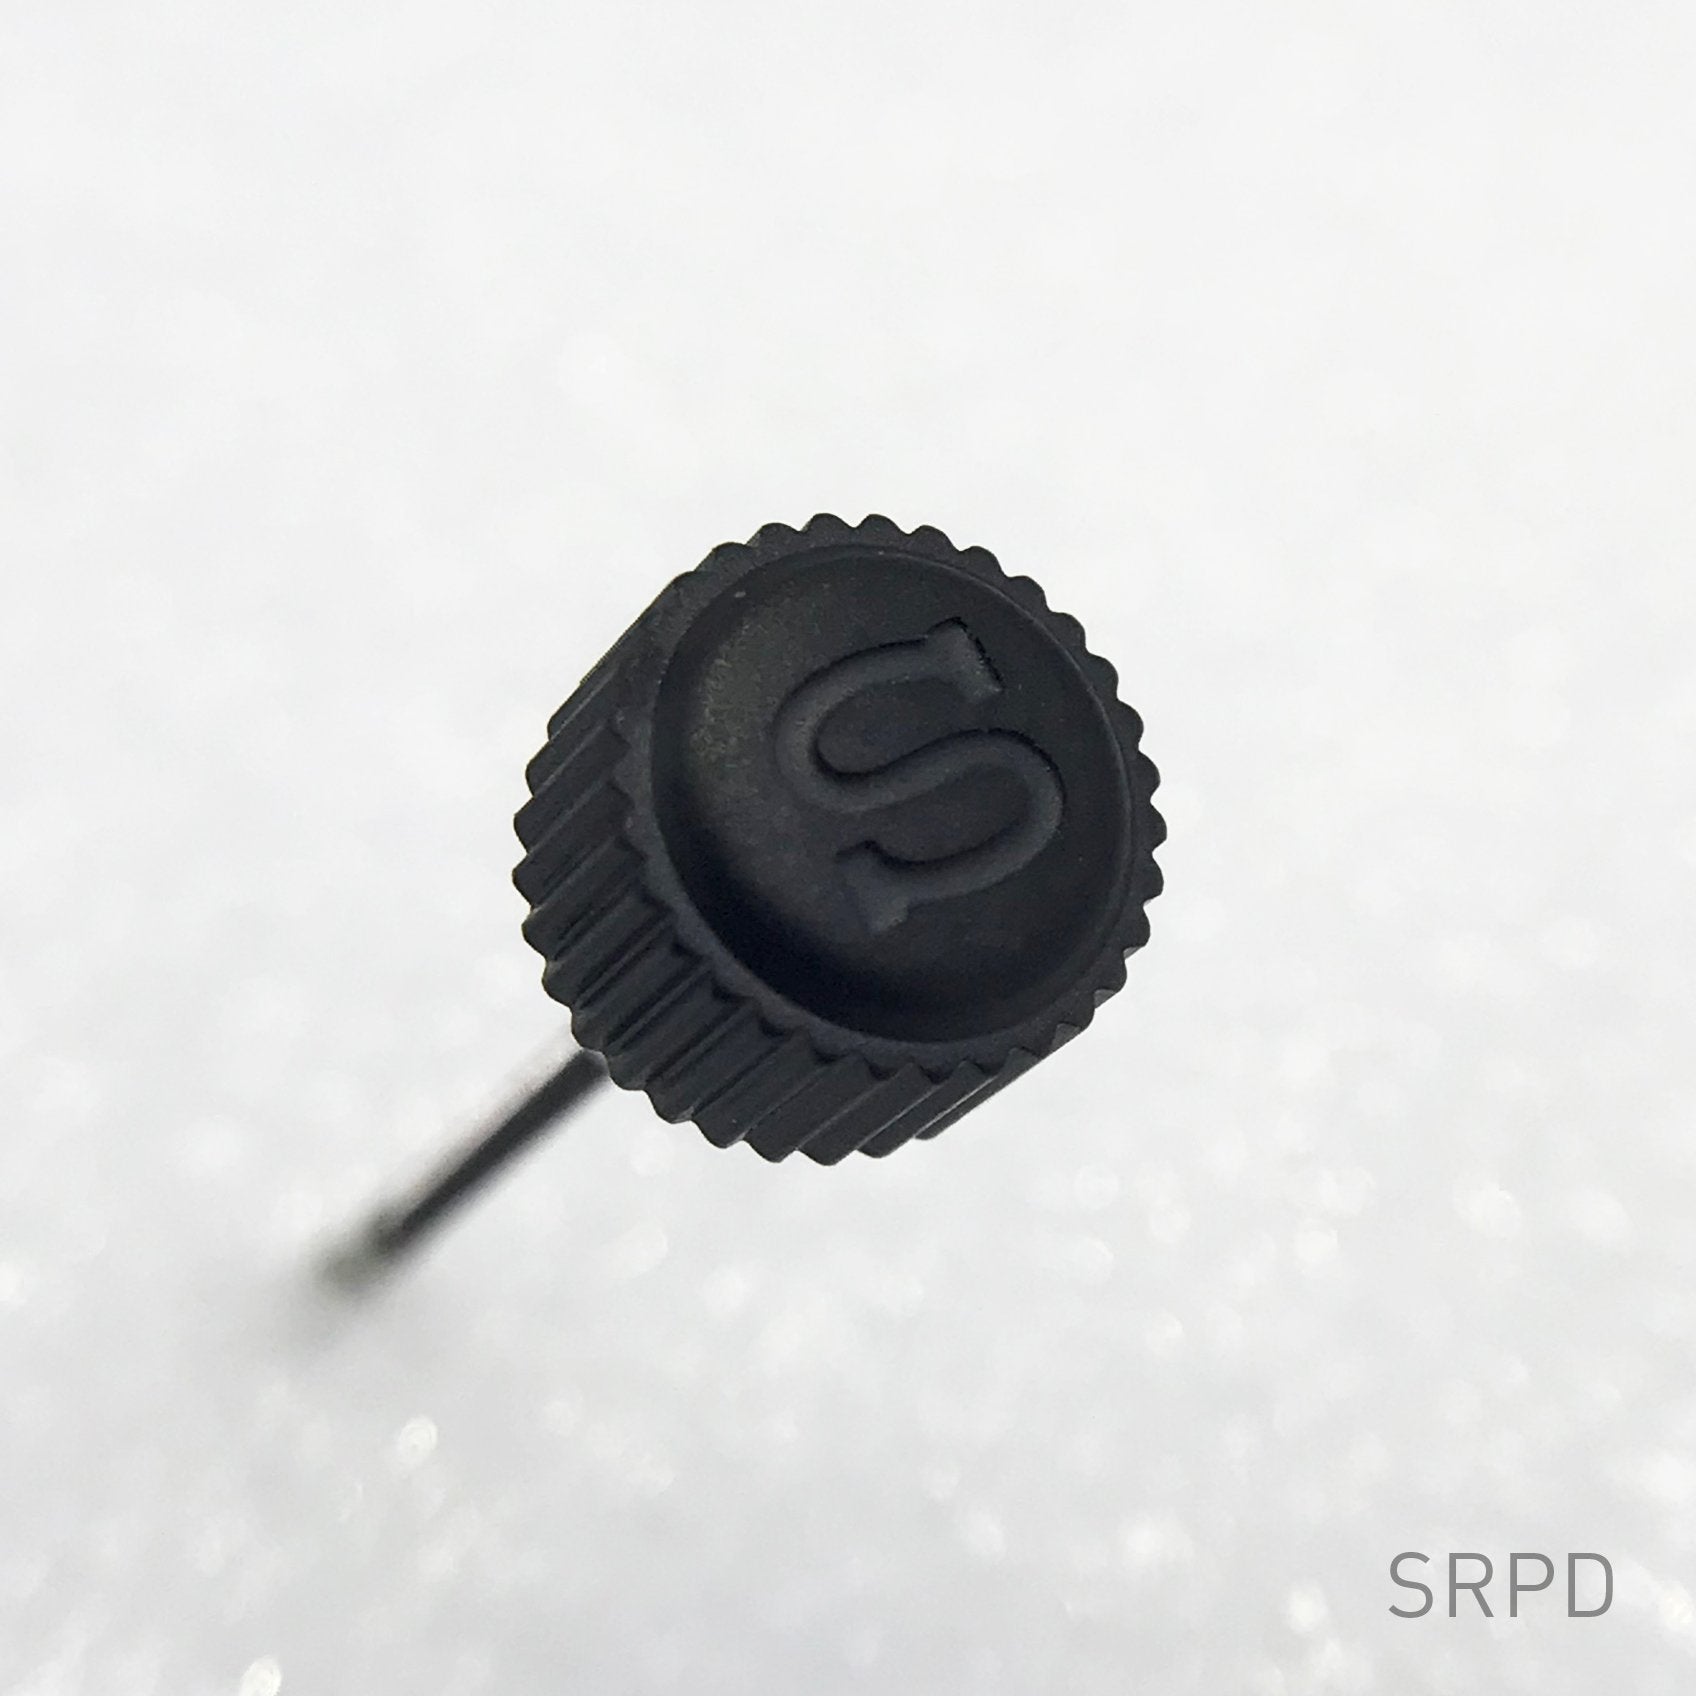 Crown - SRPD - Bead Blasted PVD Black - "S"